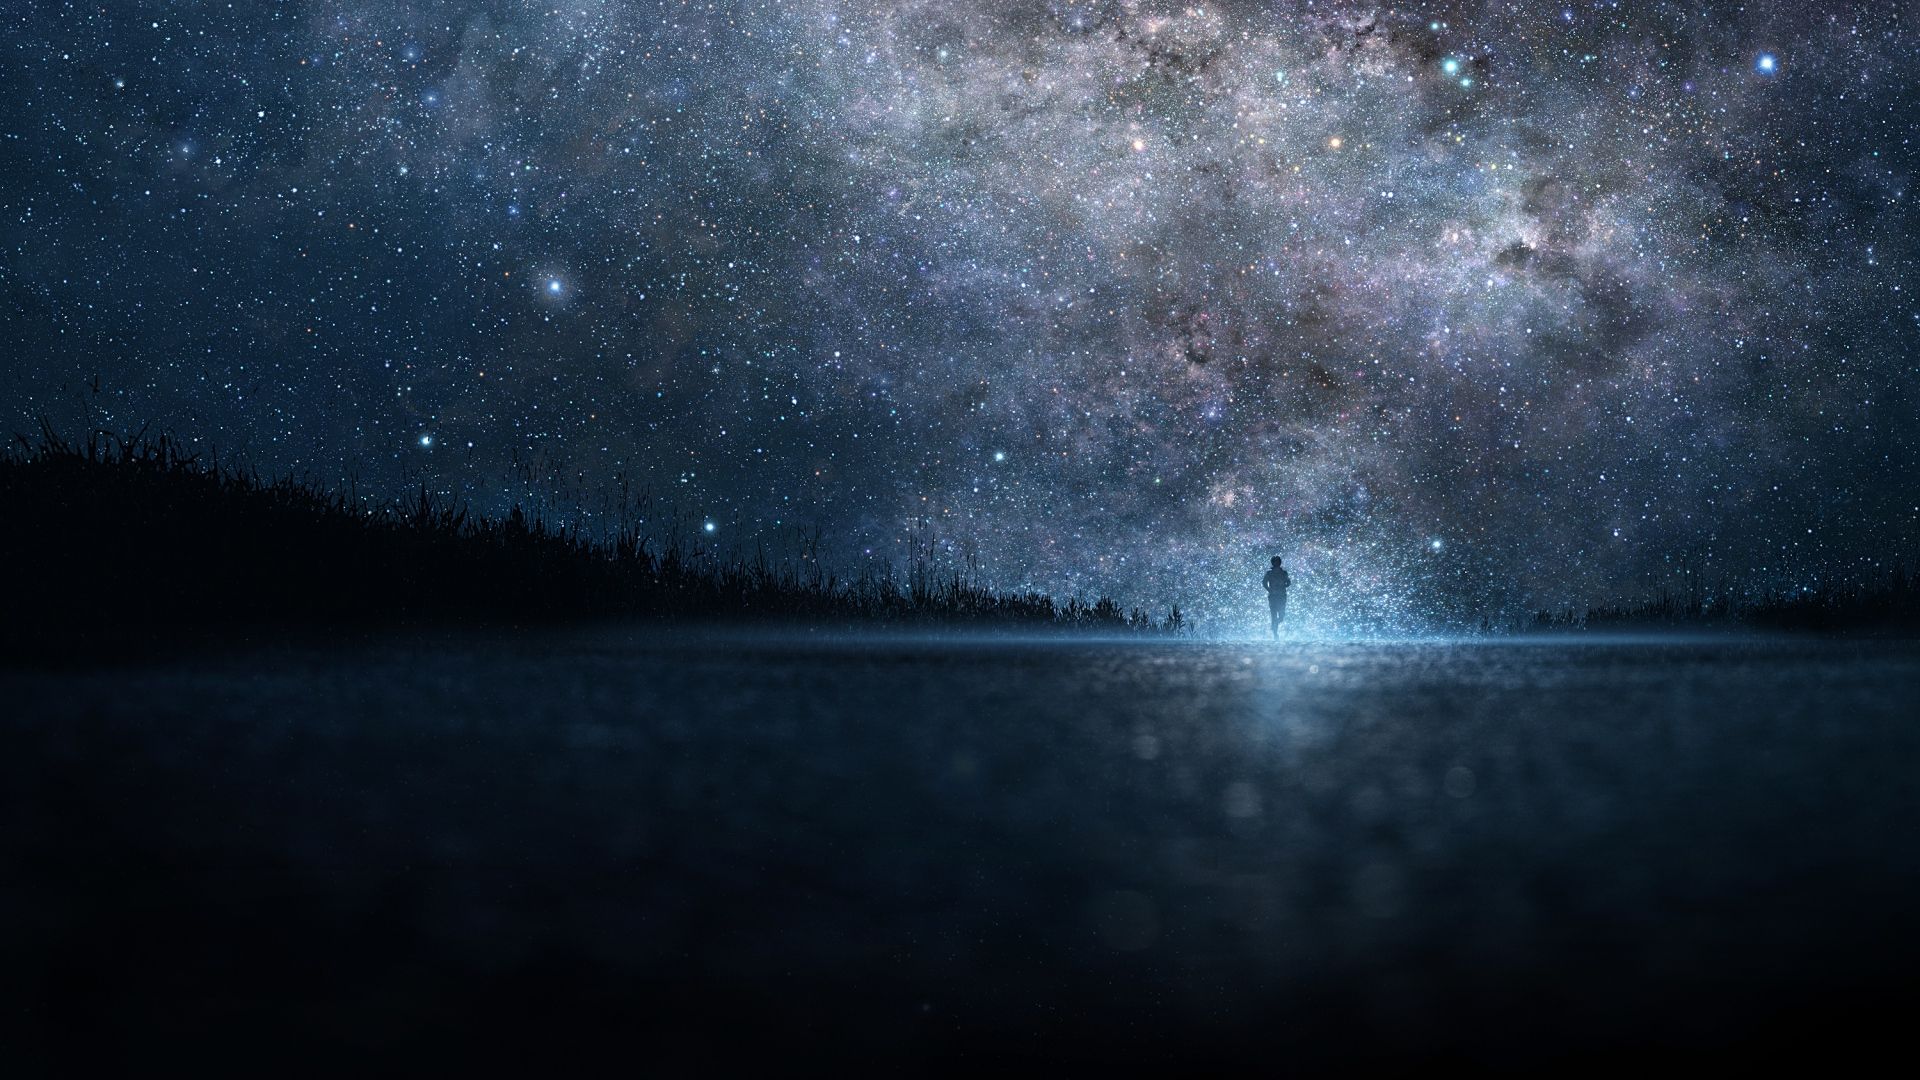 Download 1920x1080 Wallpaper romantic road to space under stars HD